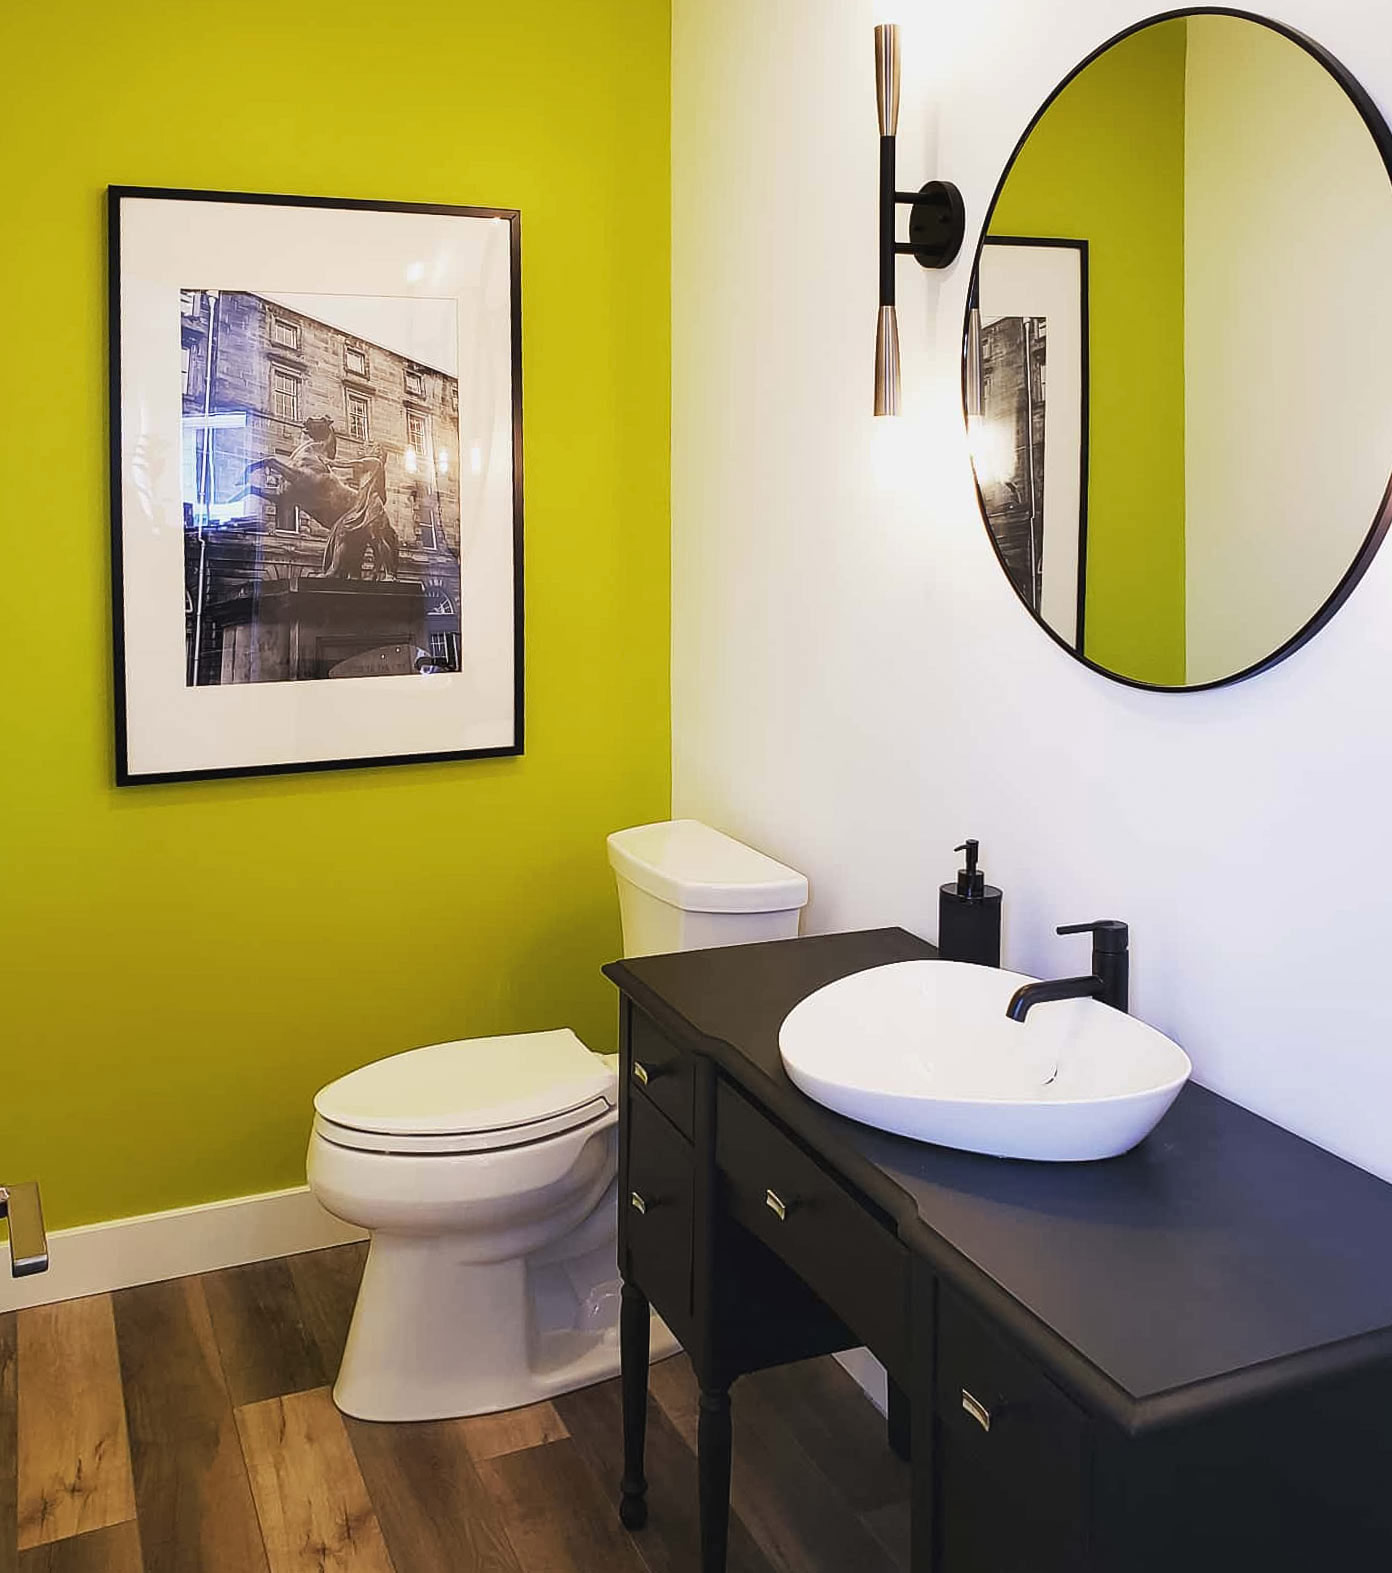 Bathroom with chartreuse color wall, round mirror and wall art